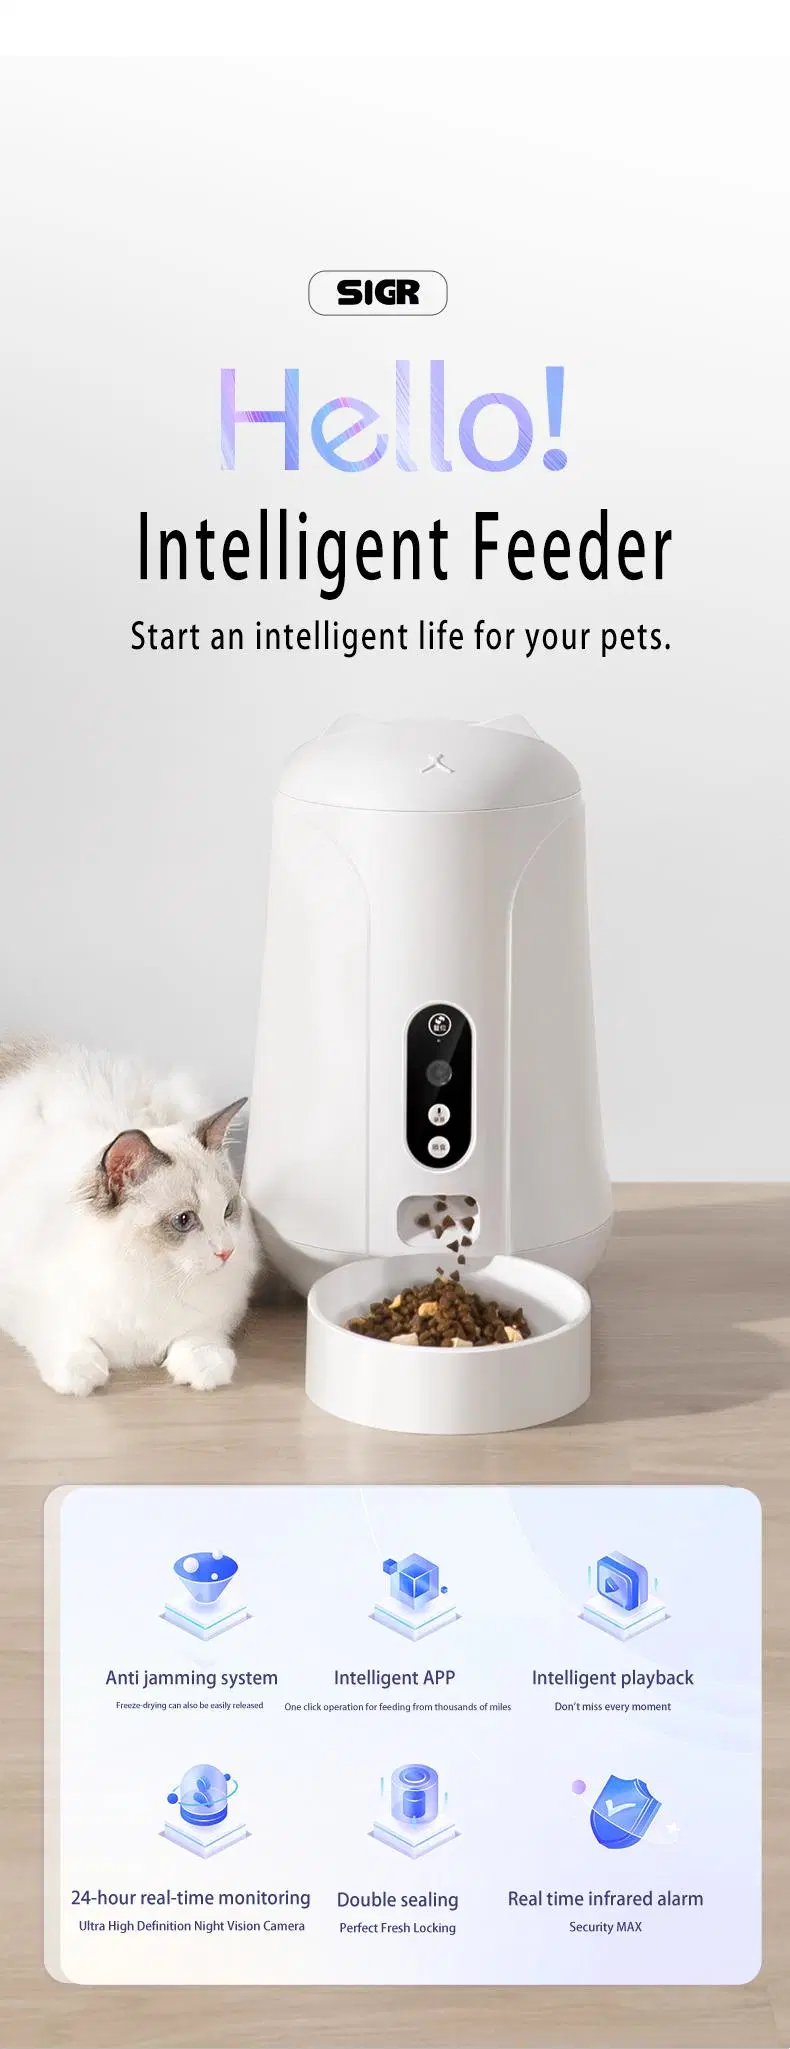 New Automatic Pet Feeder 4L Capacity Smart Pet Food Dispenser Automatic Dog Cat Feeder with Stainless Steel Bowl